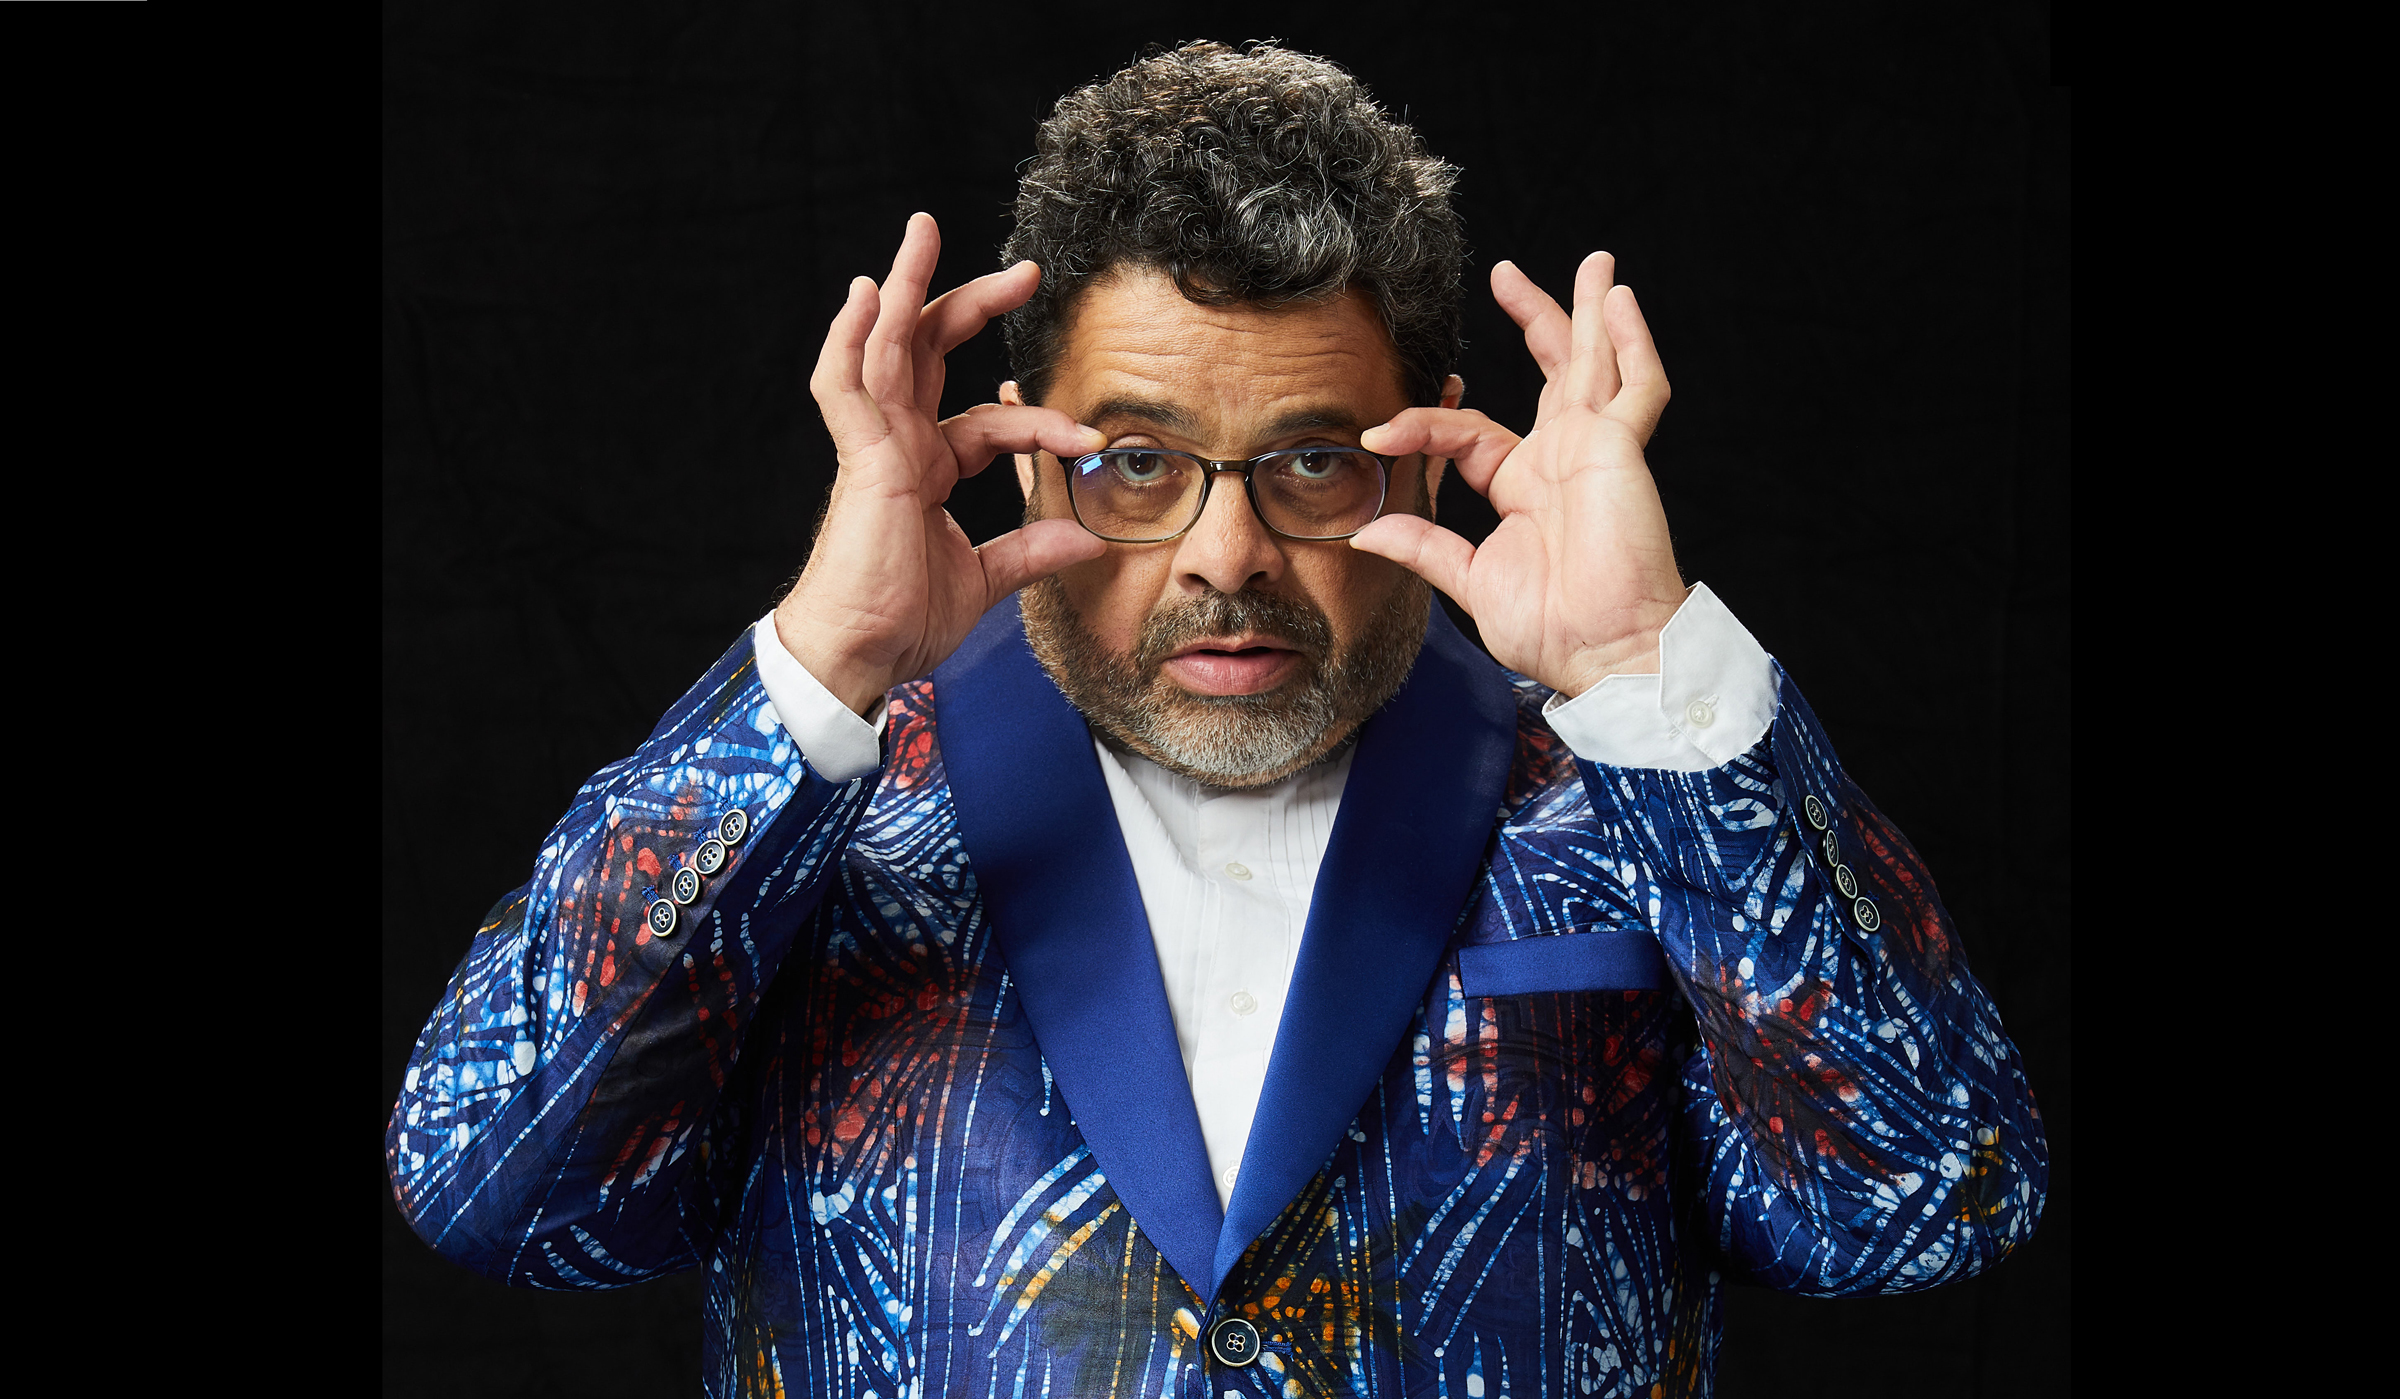 Arturo O’Farrill holds up his glasses